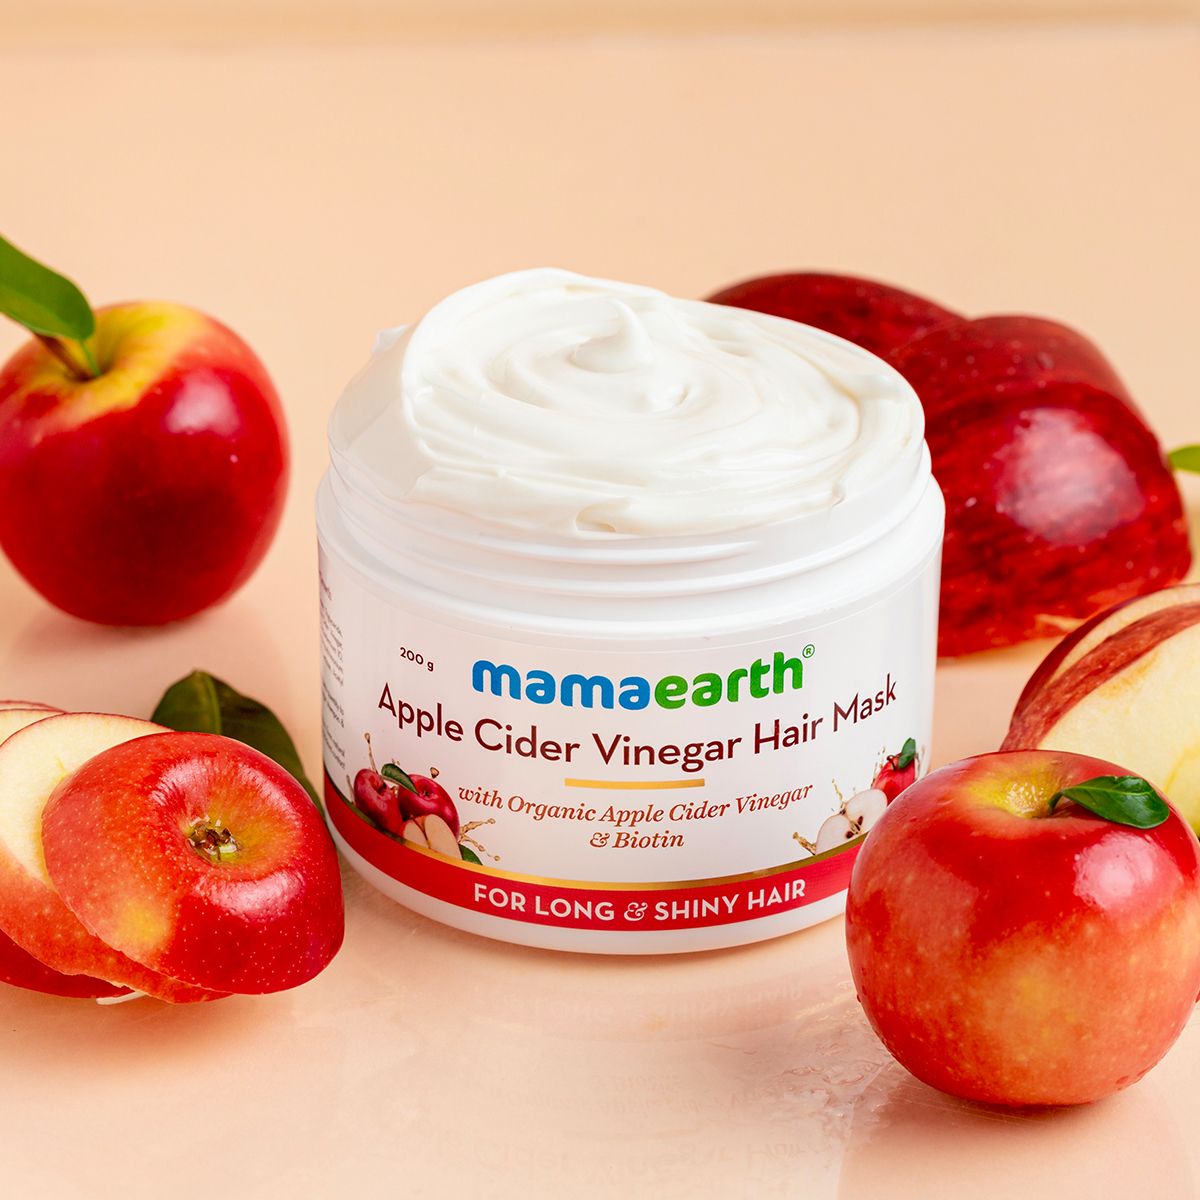 Mamaearth Apple Cider Vinegar Hair Mask with Organic Apple Cider Vinegar  and Biotin for Long and Shiny Hair - 200 g Online in India